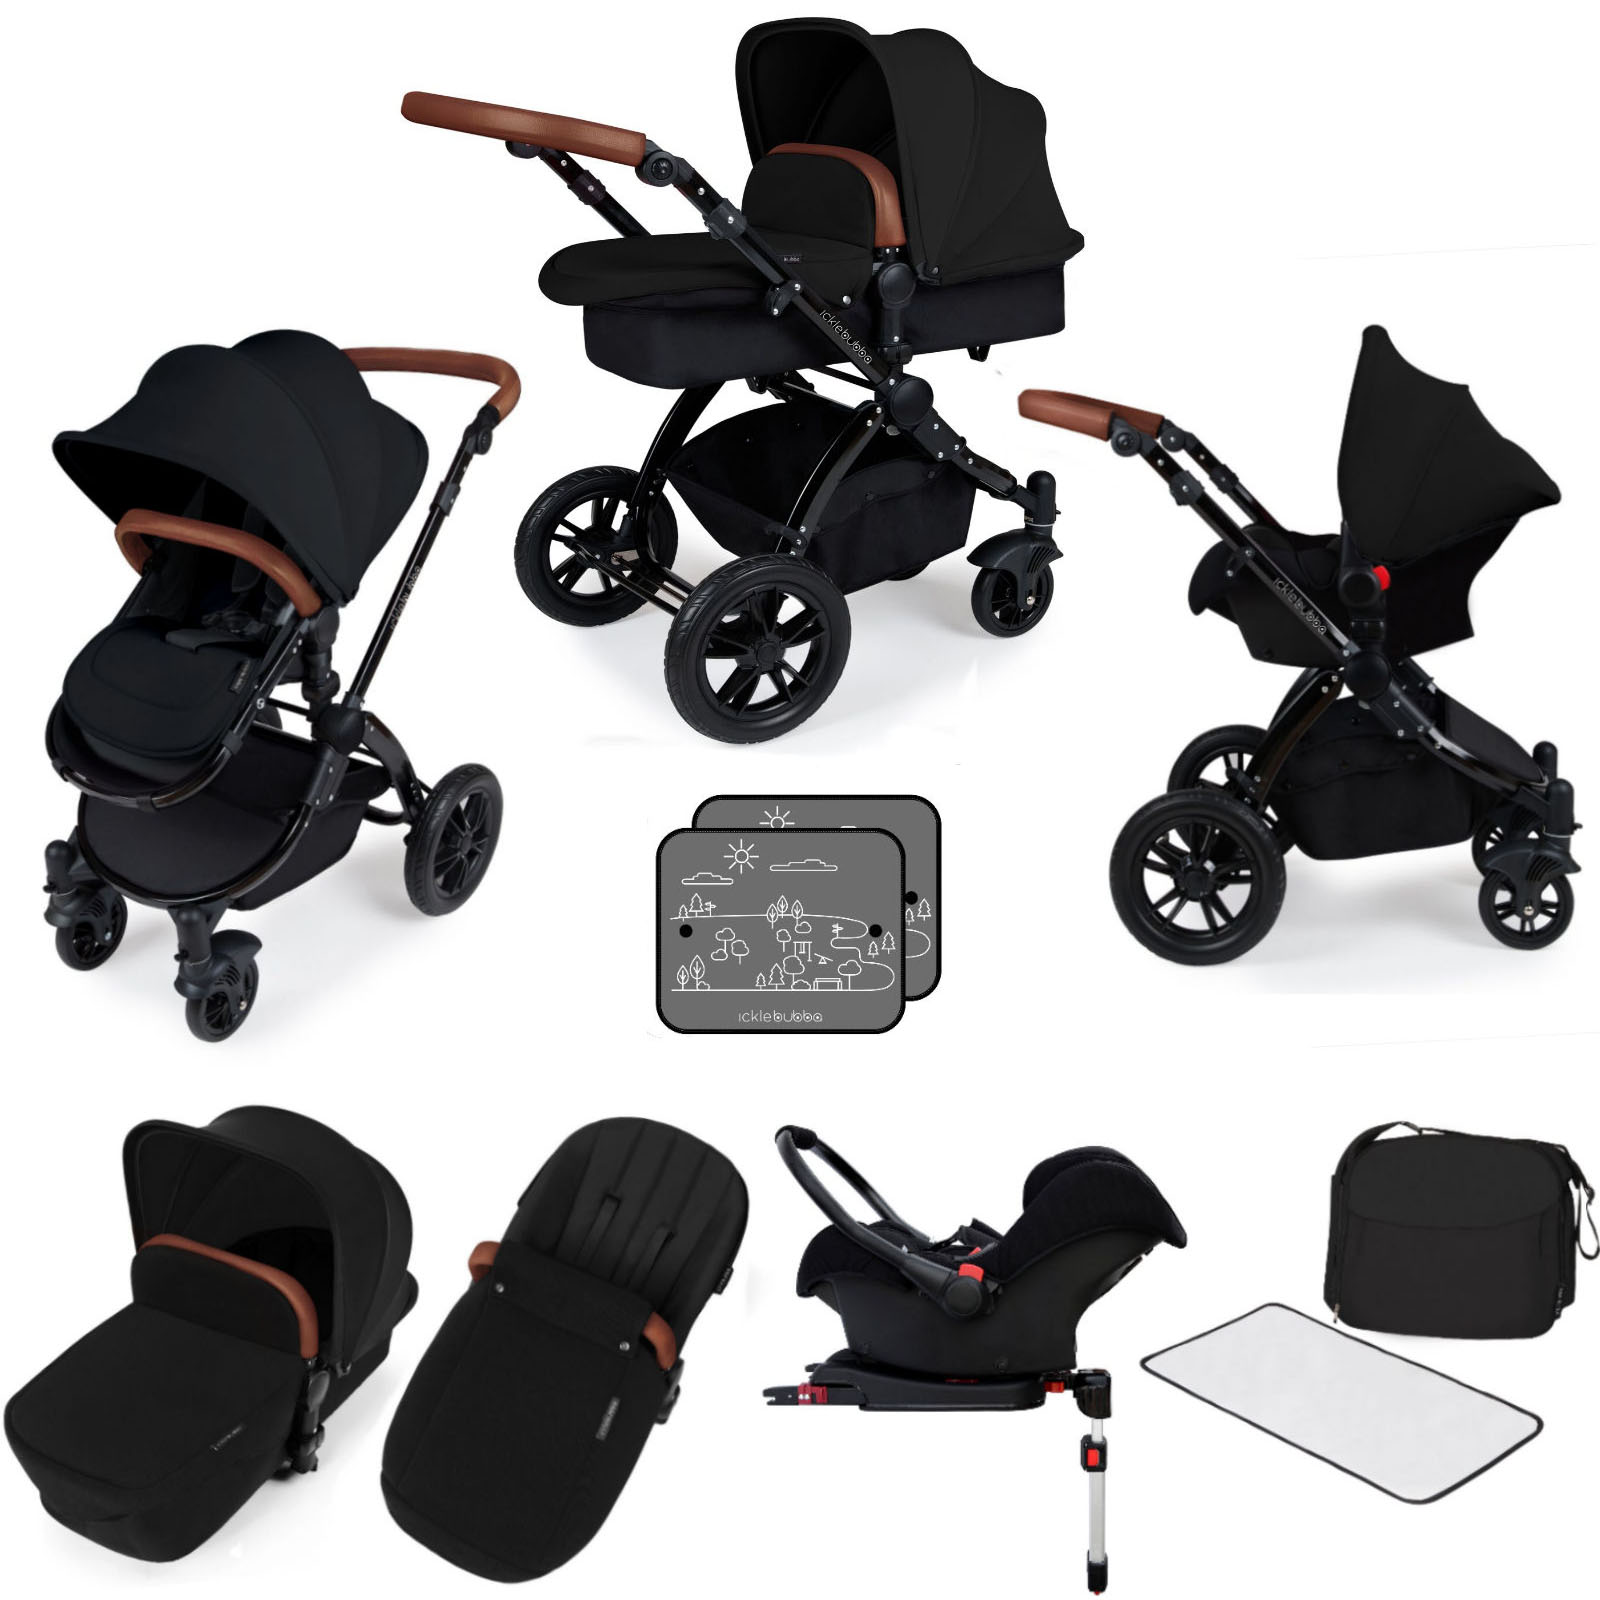 Ickle bubba Stomp V3 Black All In One Travel System & Isofix Base Bundle- Black